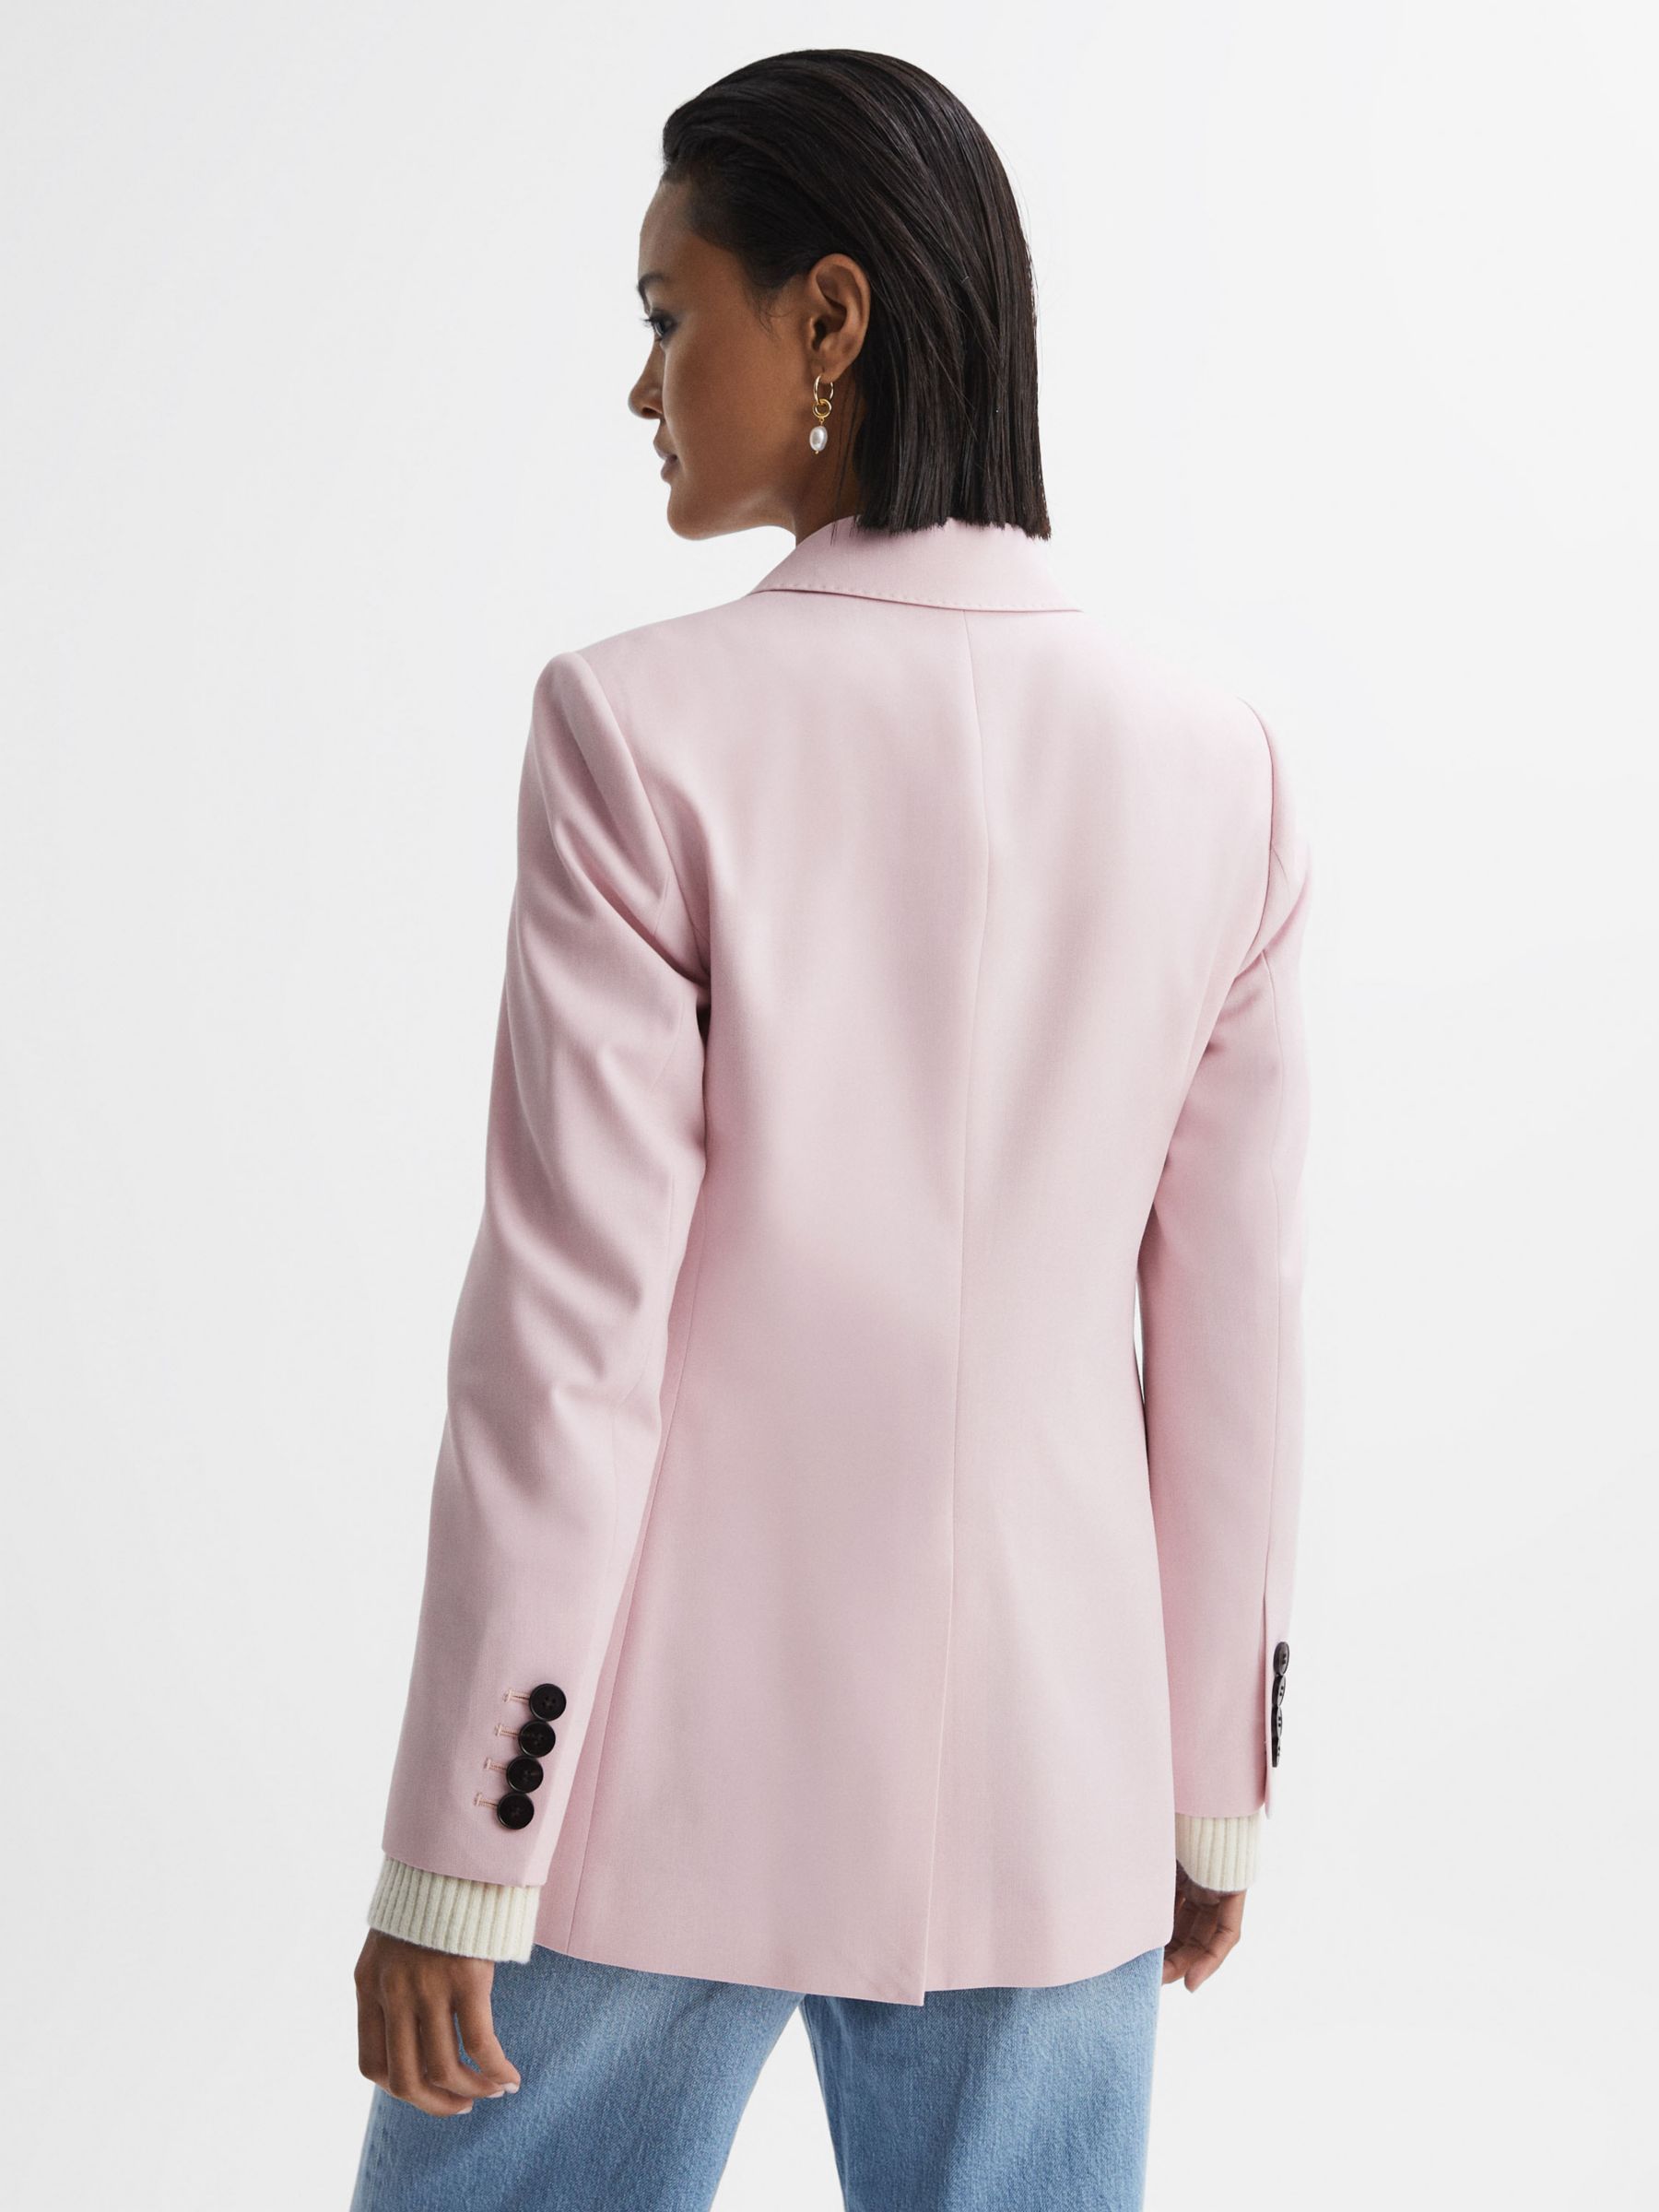 Buy Reiss Evelyn Double Breasted Wool Blend Blazer, Pink Online at johnlewis.com